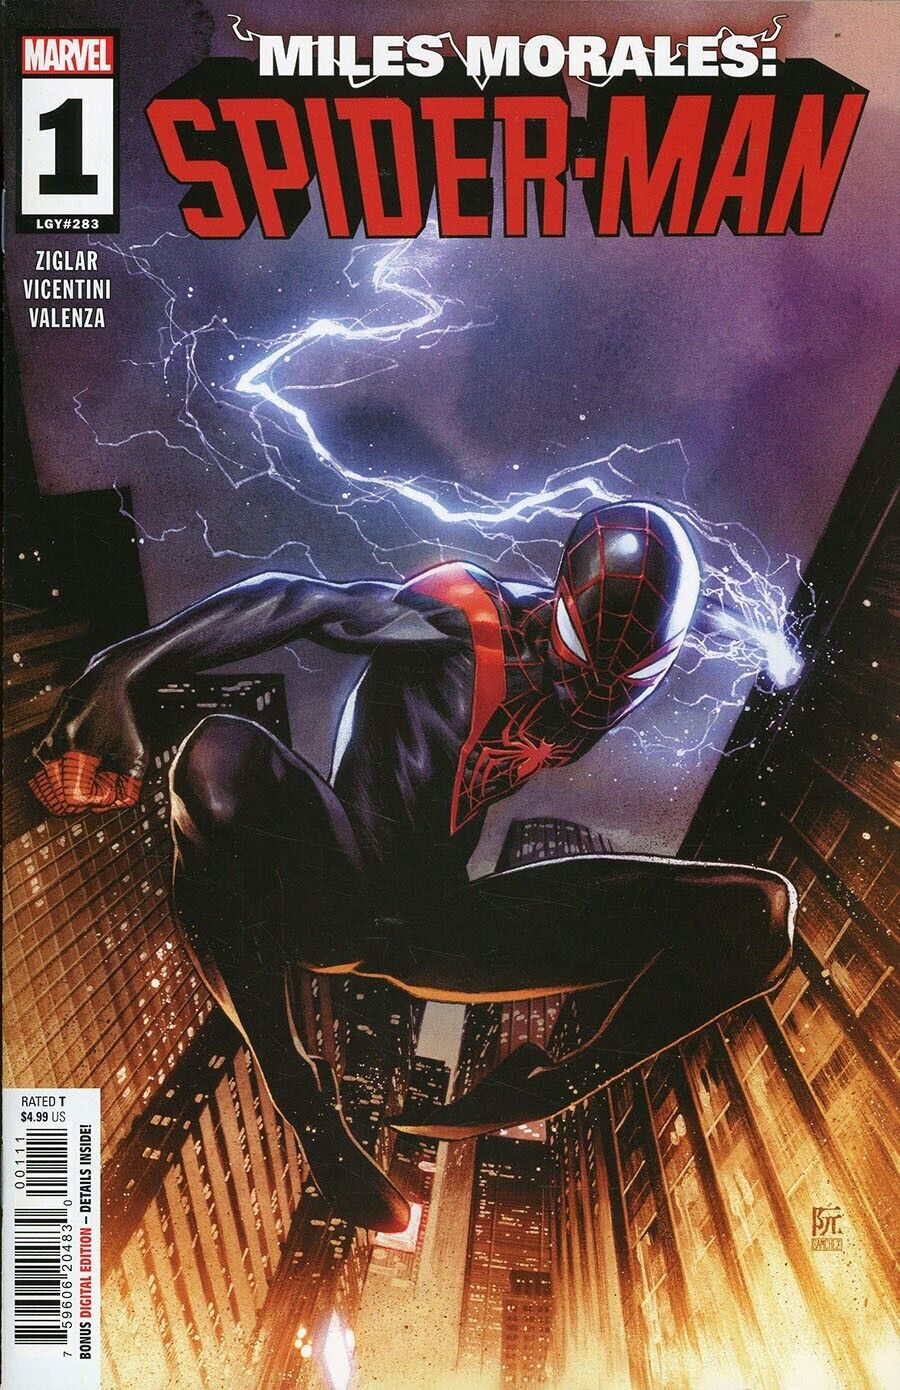 MILES MORALES SPIDER-MAN 1 NM COVER A - NEW SERIES 2022 